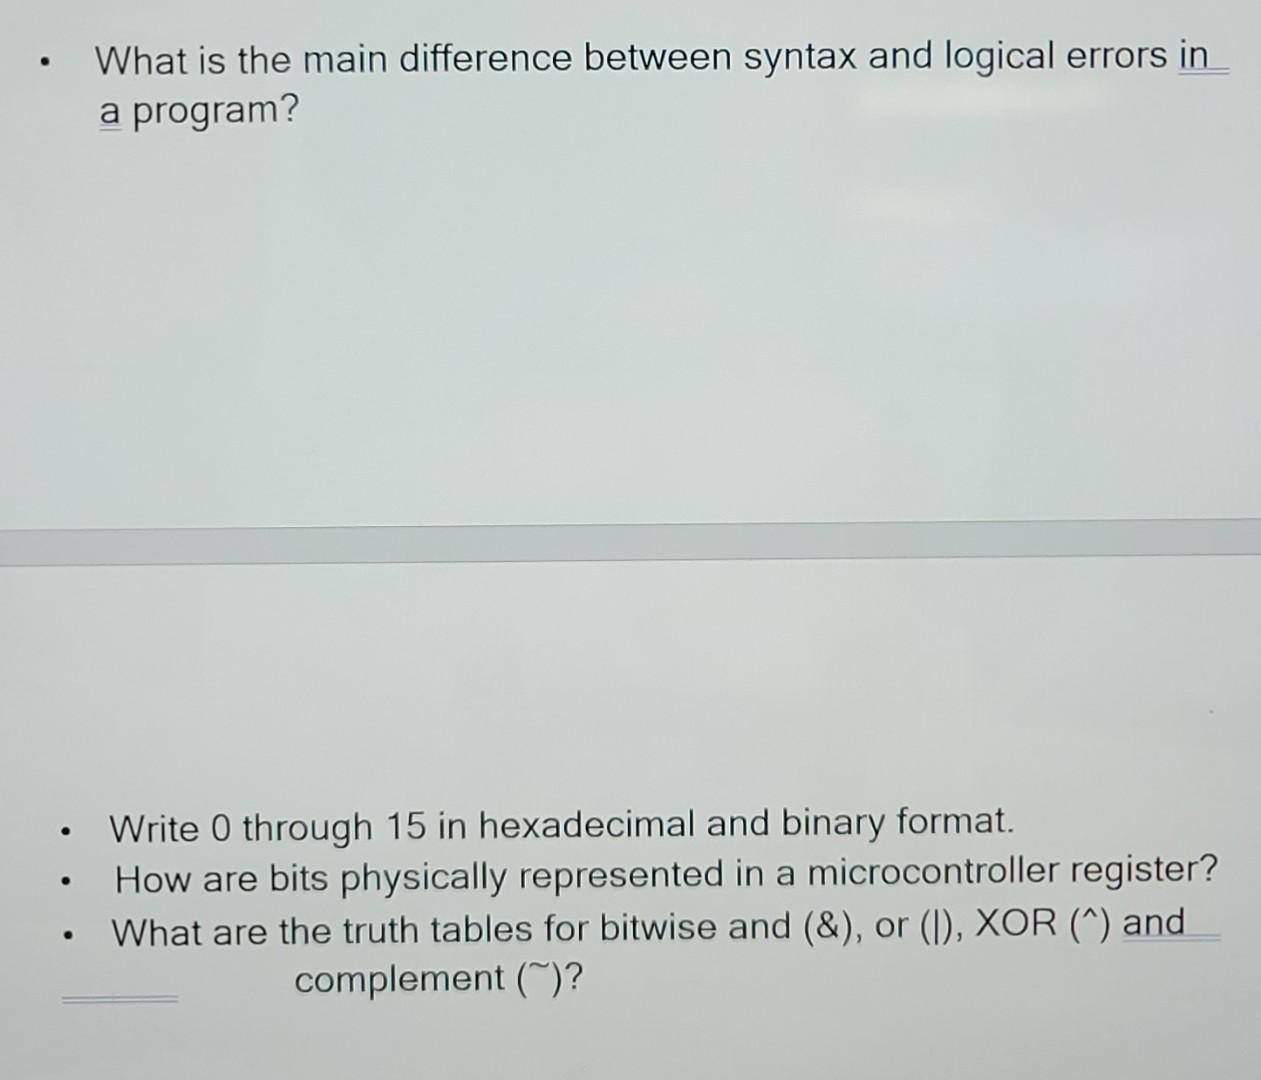 - What is the main difference between syntax and logical errors in a program?
- Write 0 through 15 in hexadecimal and binary 